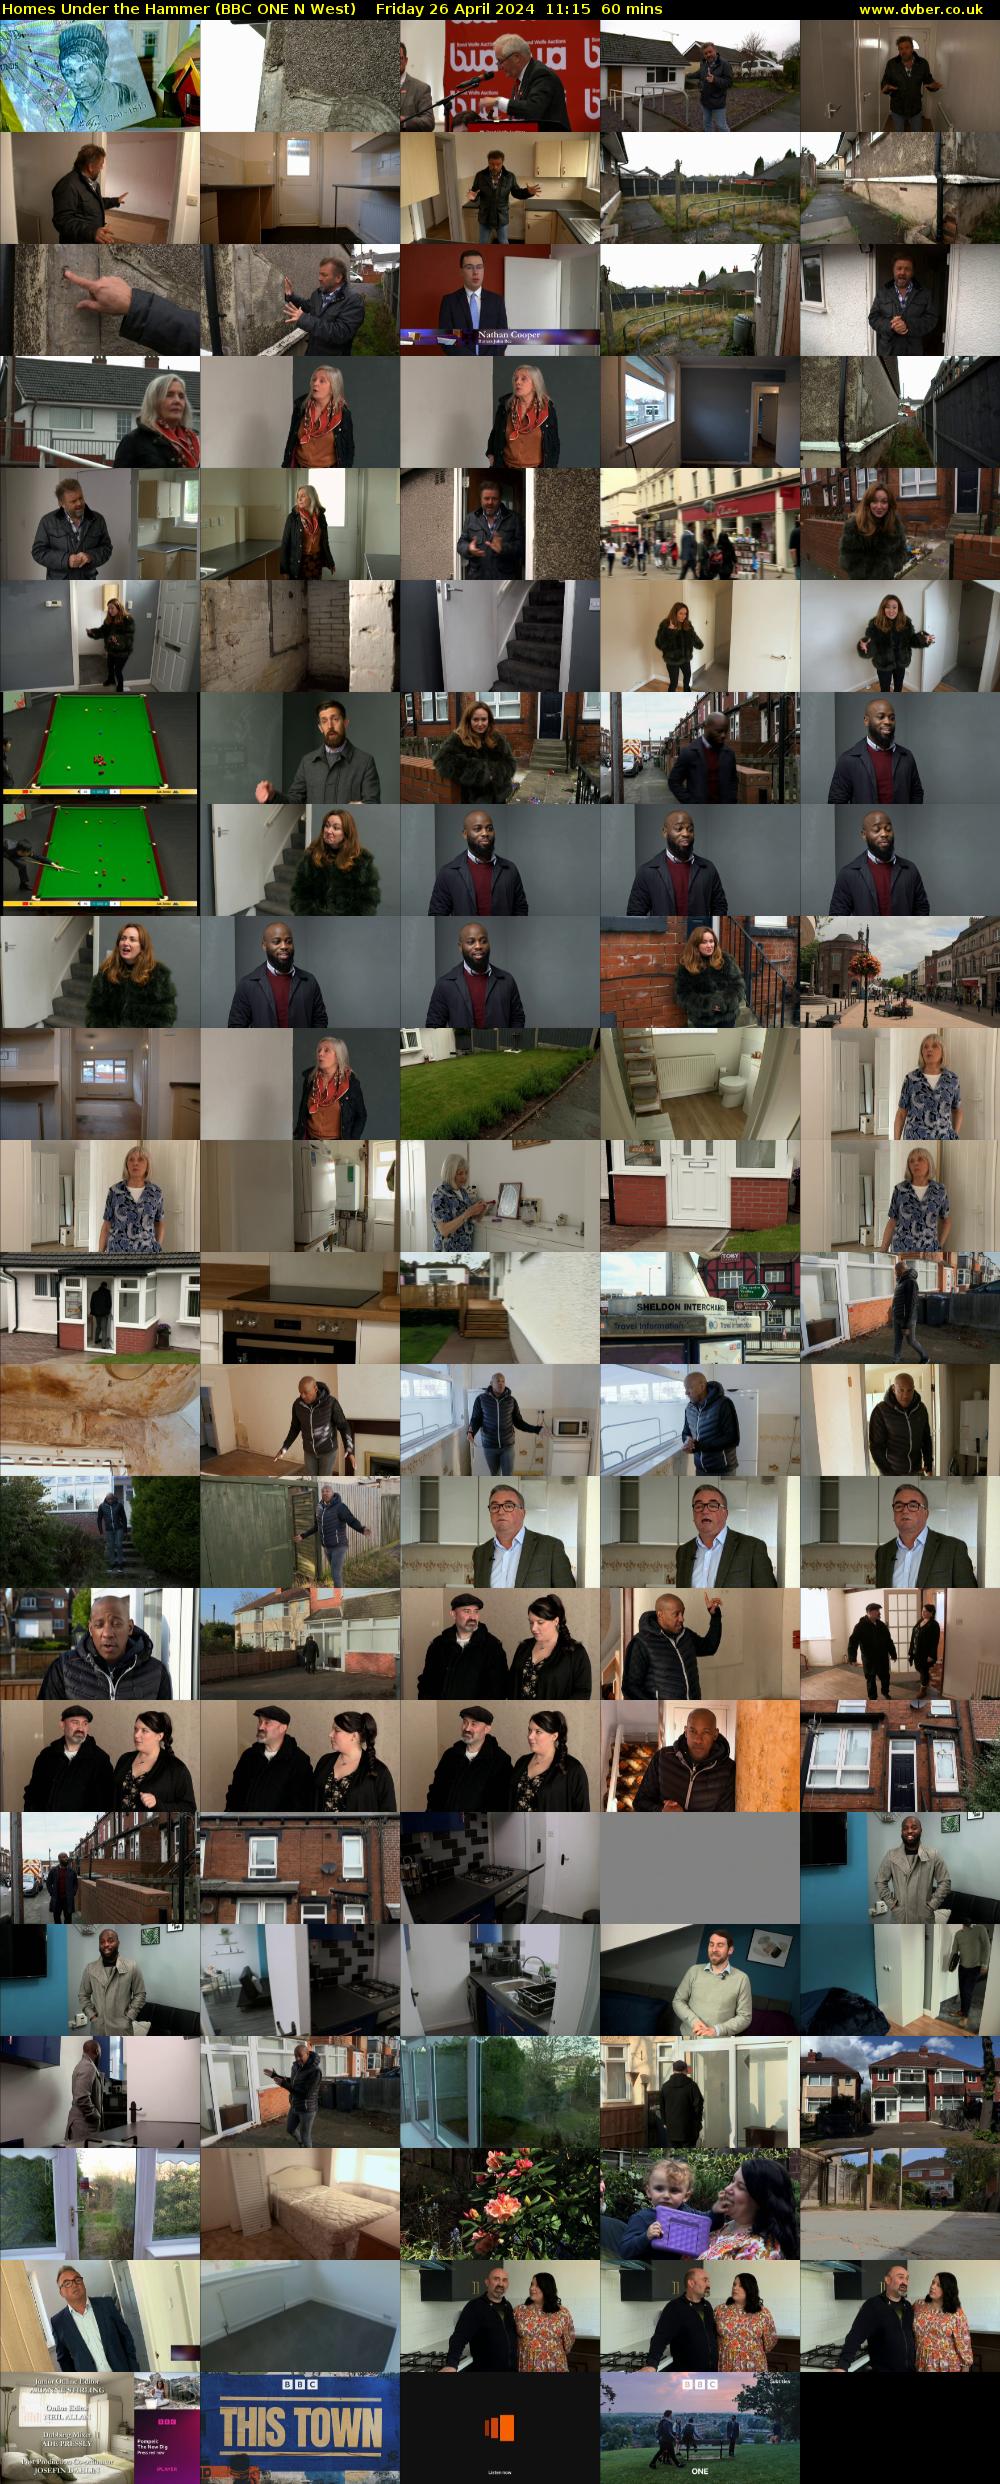 Homes Under the Hammer (BBC ONE N West) Friday 26 April 2024 11:15 - 12:15